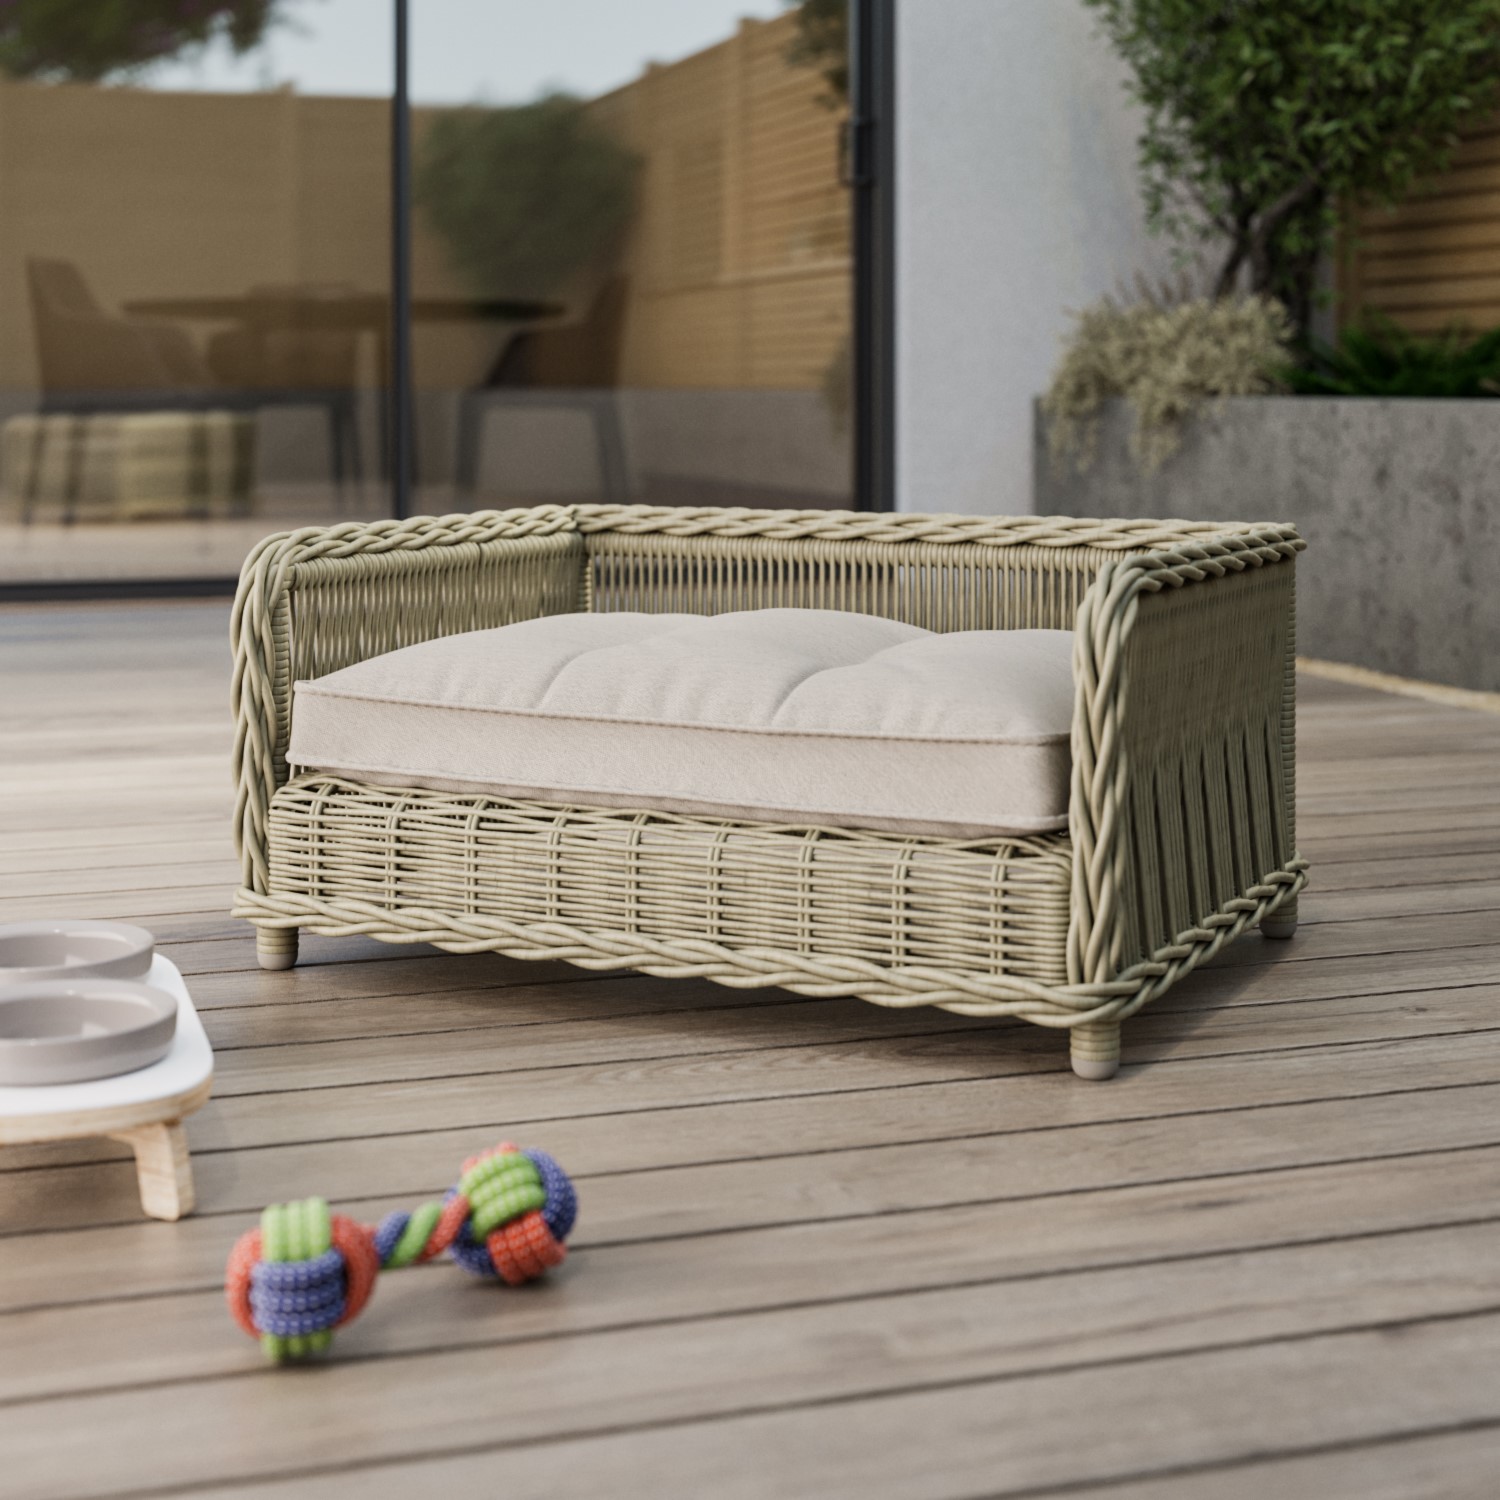 Read more about Medium rattan outdoor pet bed